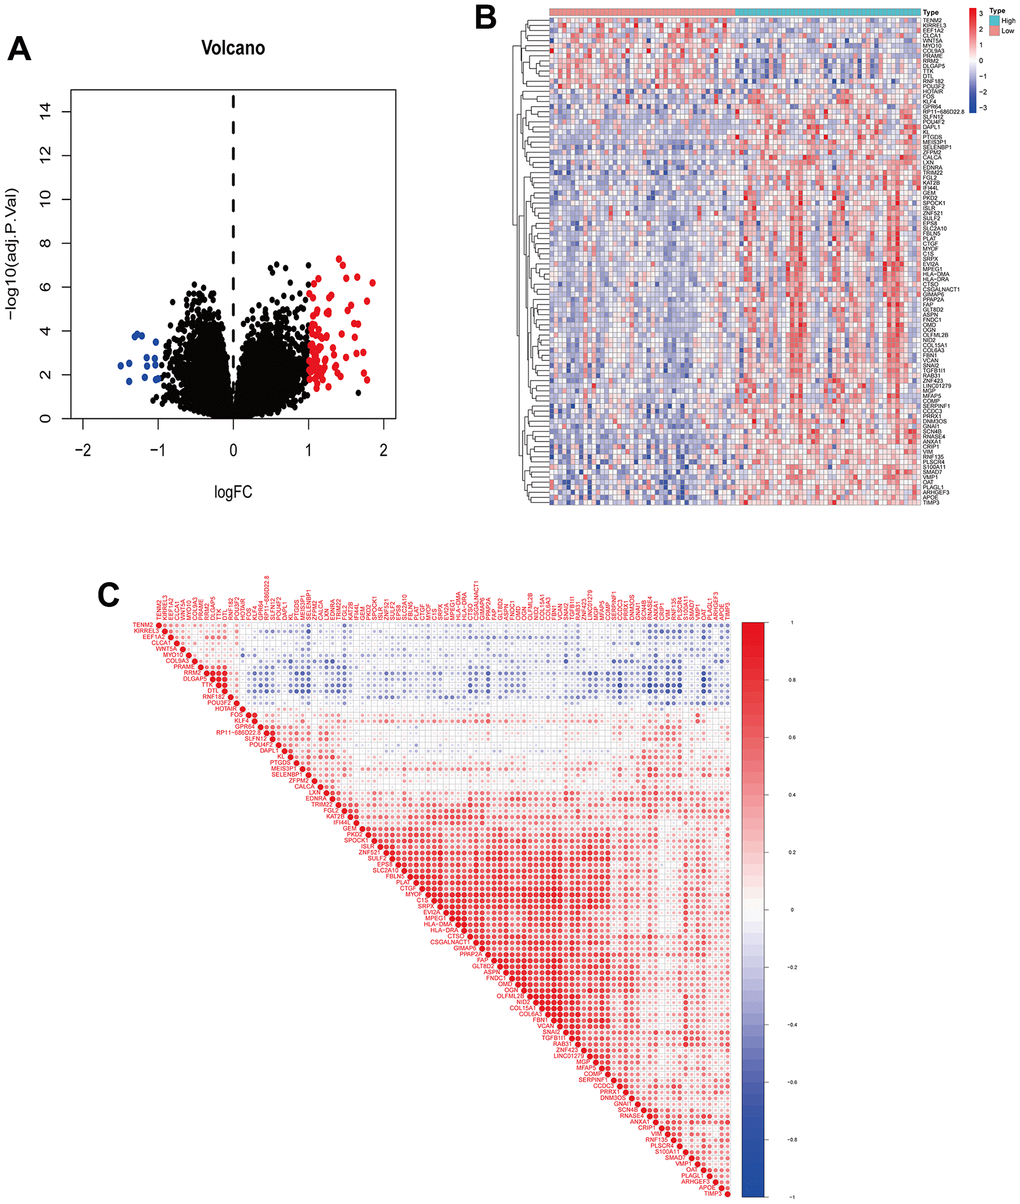 Visualization of DEGs and correlation analysis of ANXA1. (A) Volcano plot of DEGs. Red dots indicate upregulated genes, green dots indicate downregulated genes, and black dots indicate genes with insignificant differences. (B) Heatmap of DEGs. Red indicates high expression, blue indicates low expression, and white indicates moderate expression. (C) Correlation coefficient heatmap of DEGs. Red represents positive correlation and green represents negative correlation.